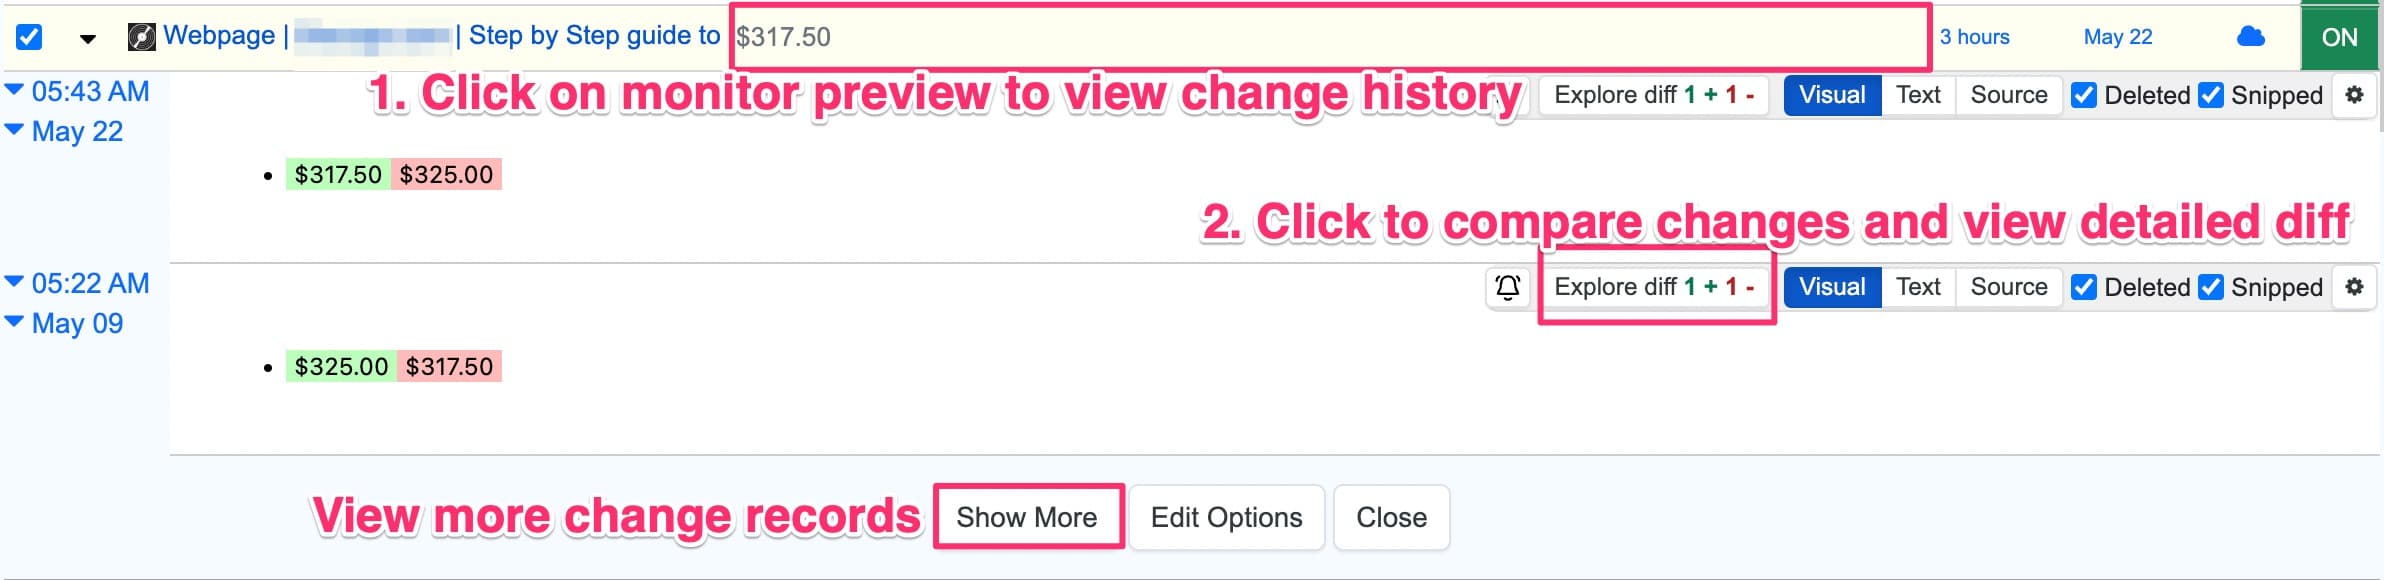 change history of a webpage